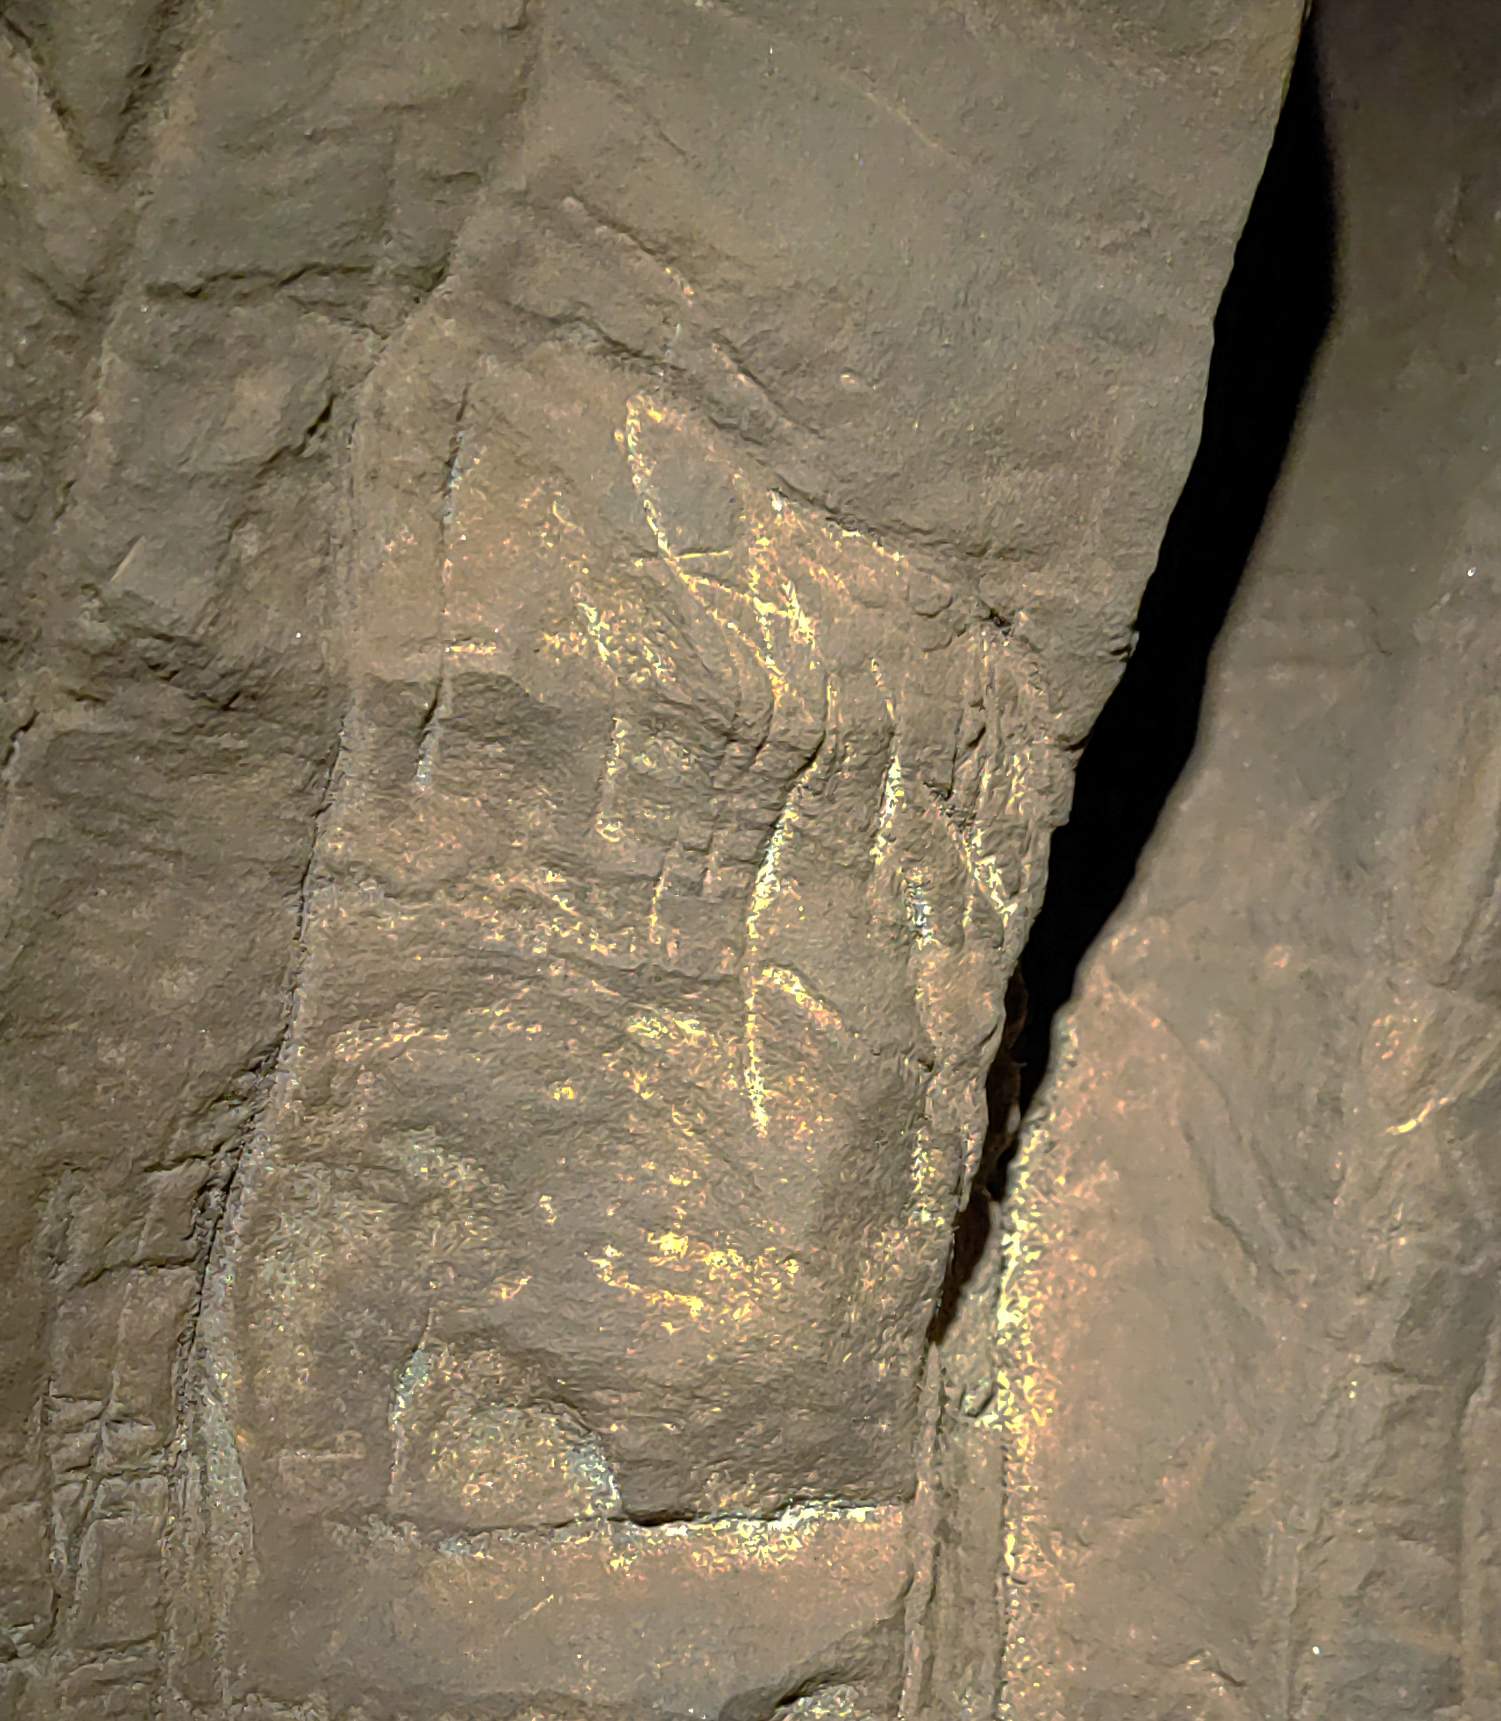 Engravings were found in the Hill Antechamber burial chamber, such as an upside-down cross shape. There is also a material applied over the surface to highlight the non-geometric images in low light, although this has not yet been analyzed.